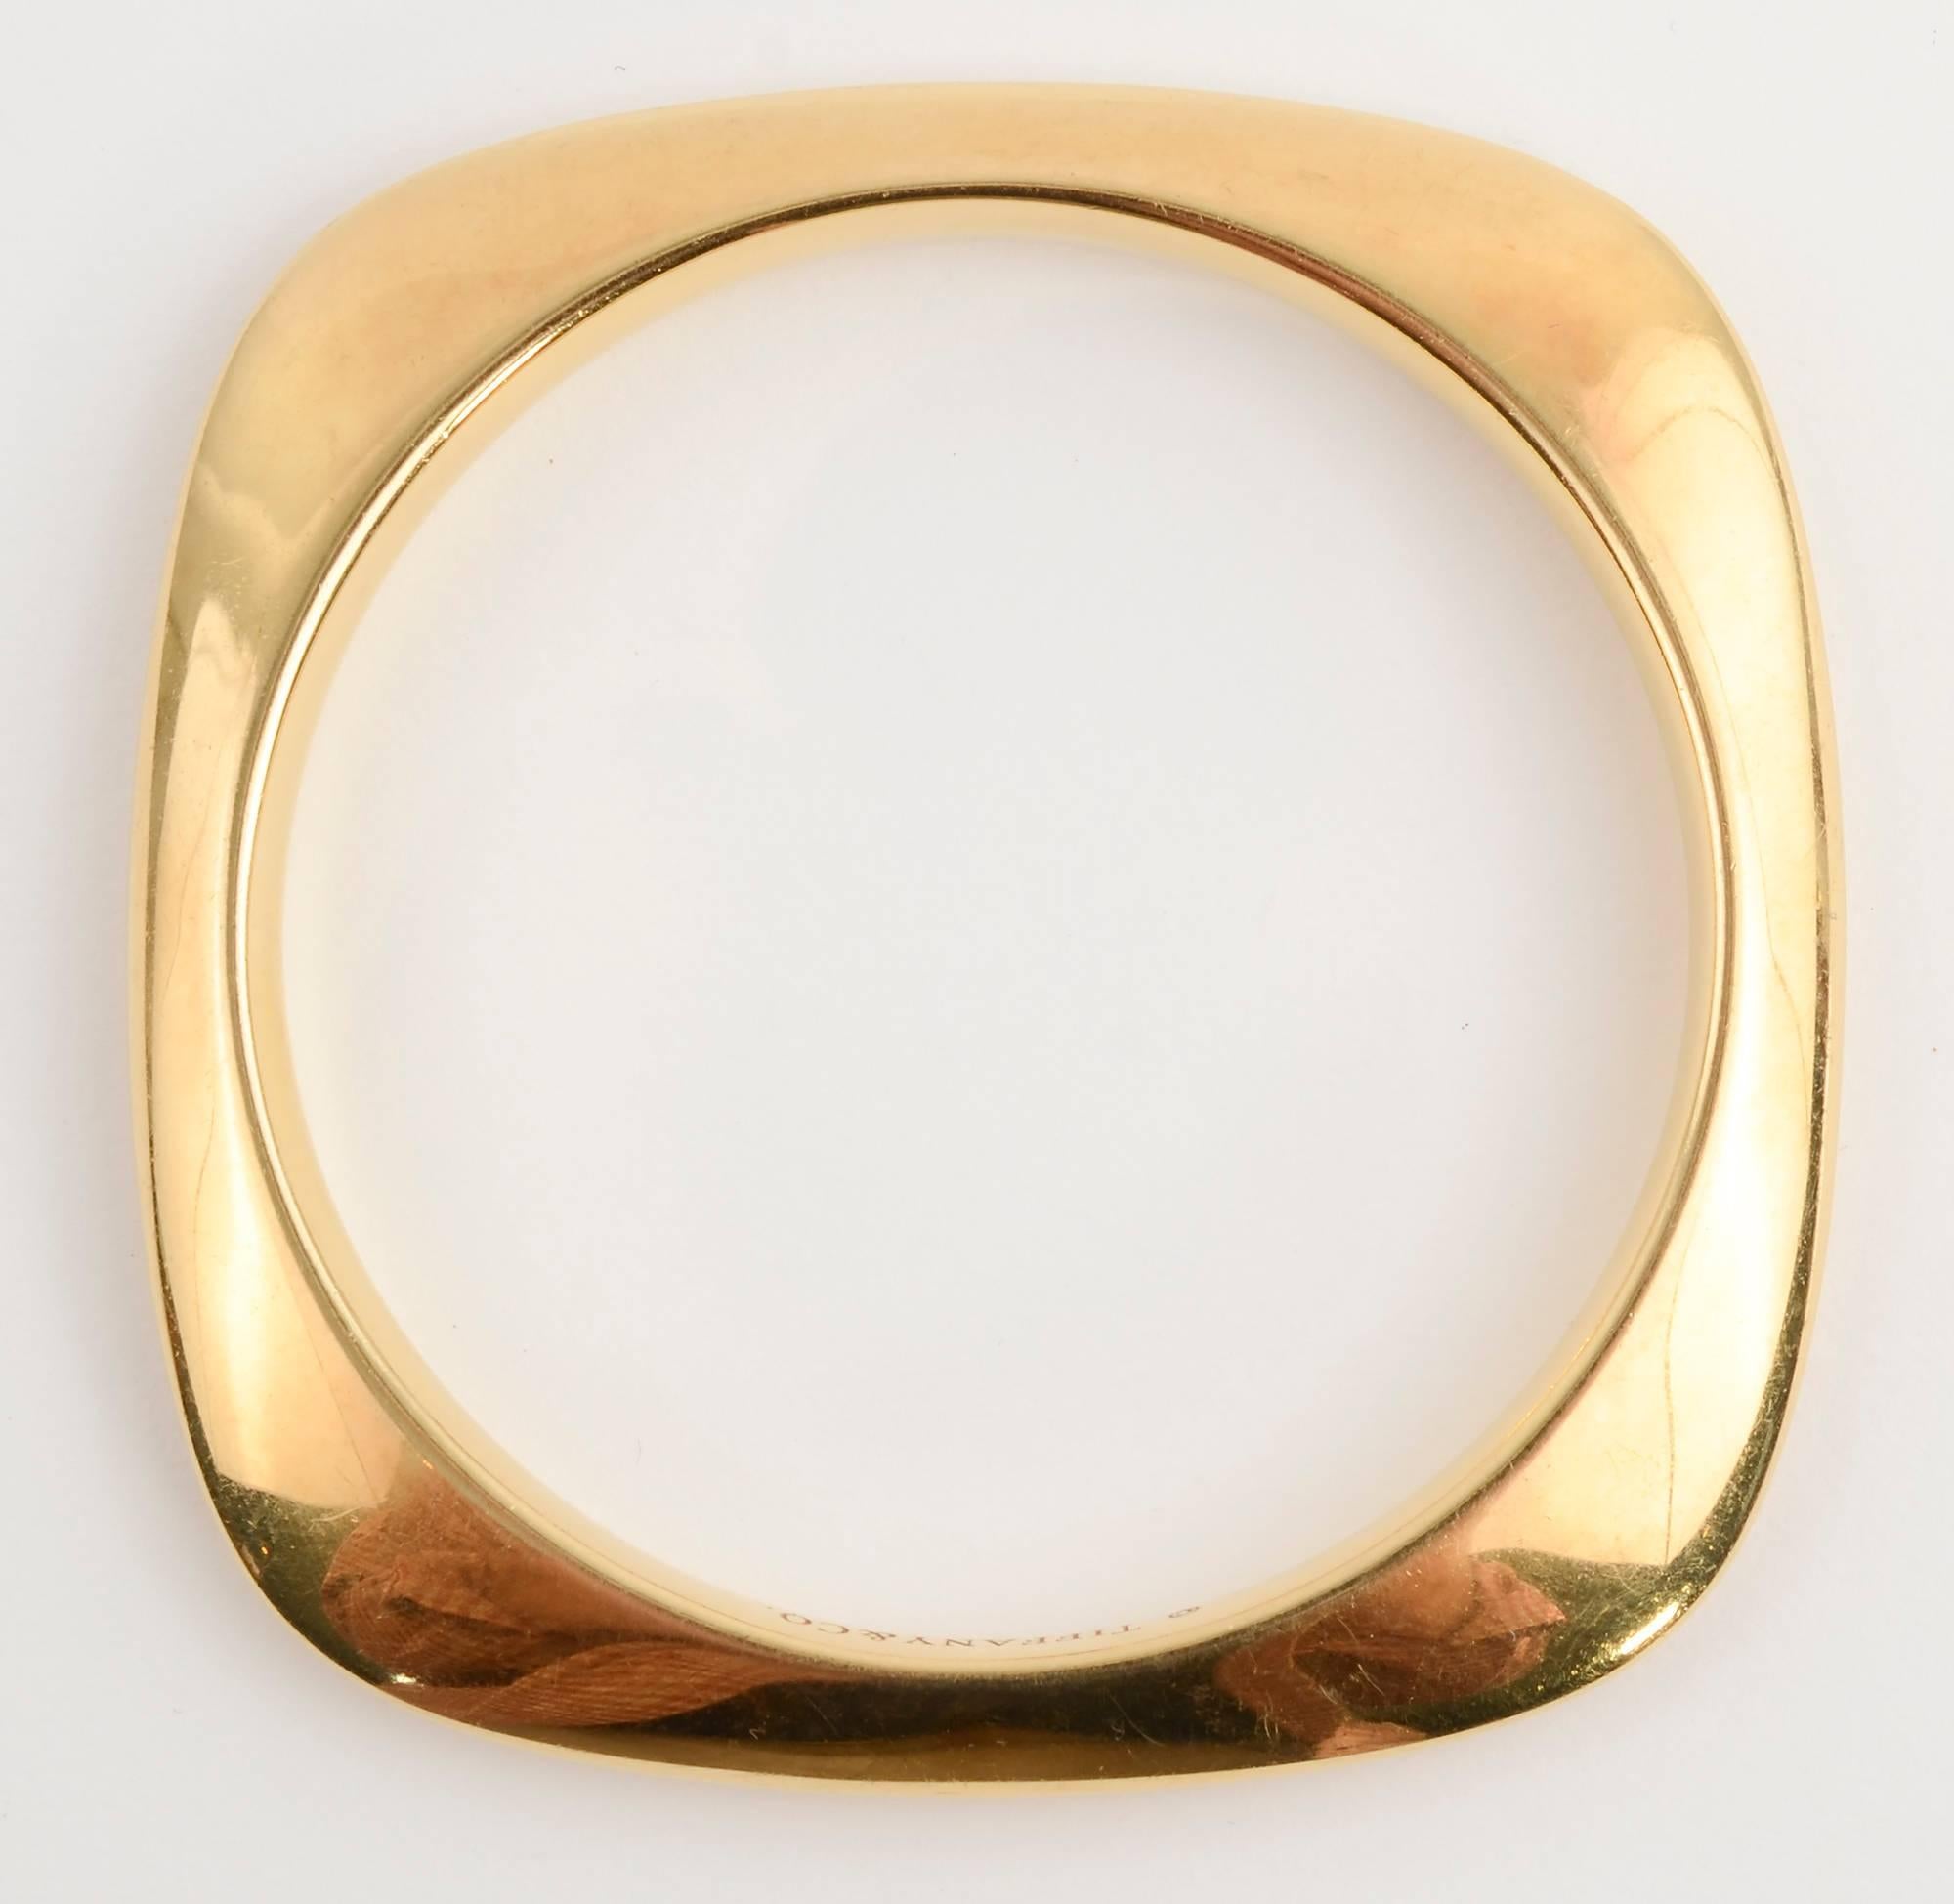 Wonderful modernist design 18 karat gold bangle bracelet by Tiffany and Co.
The square bracelet has rounded edges and a round interior that is 2 5/8 inches in diameter. It fits a medium wrist. 